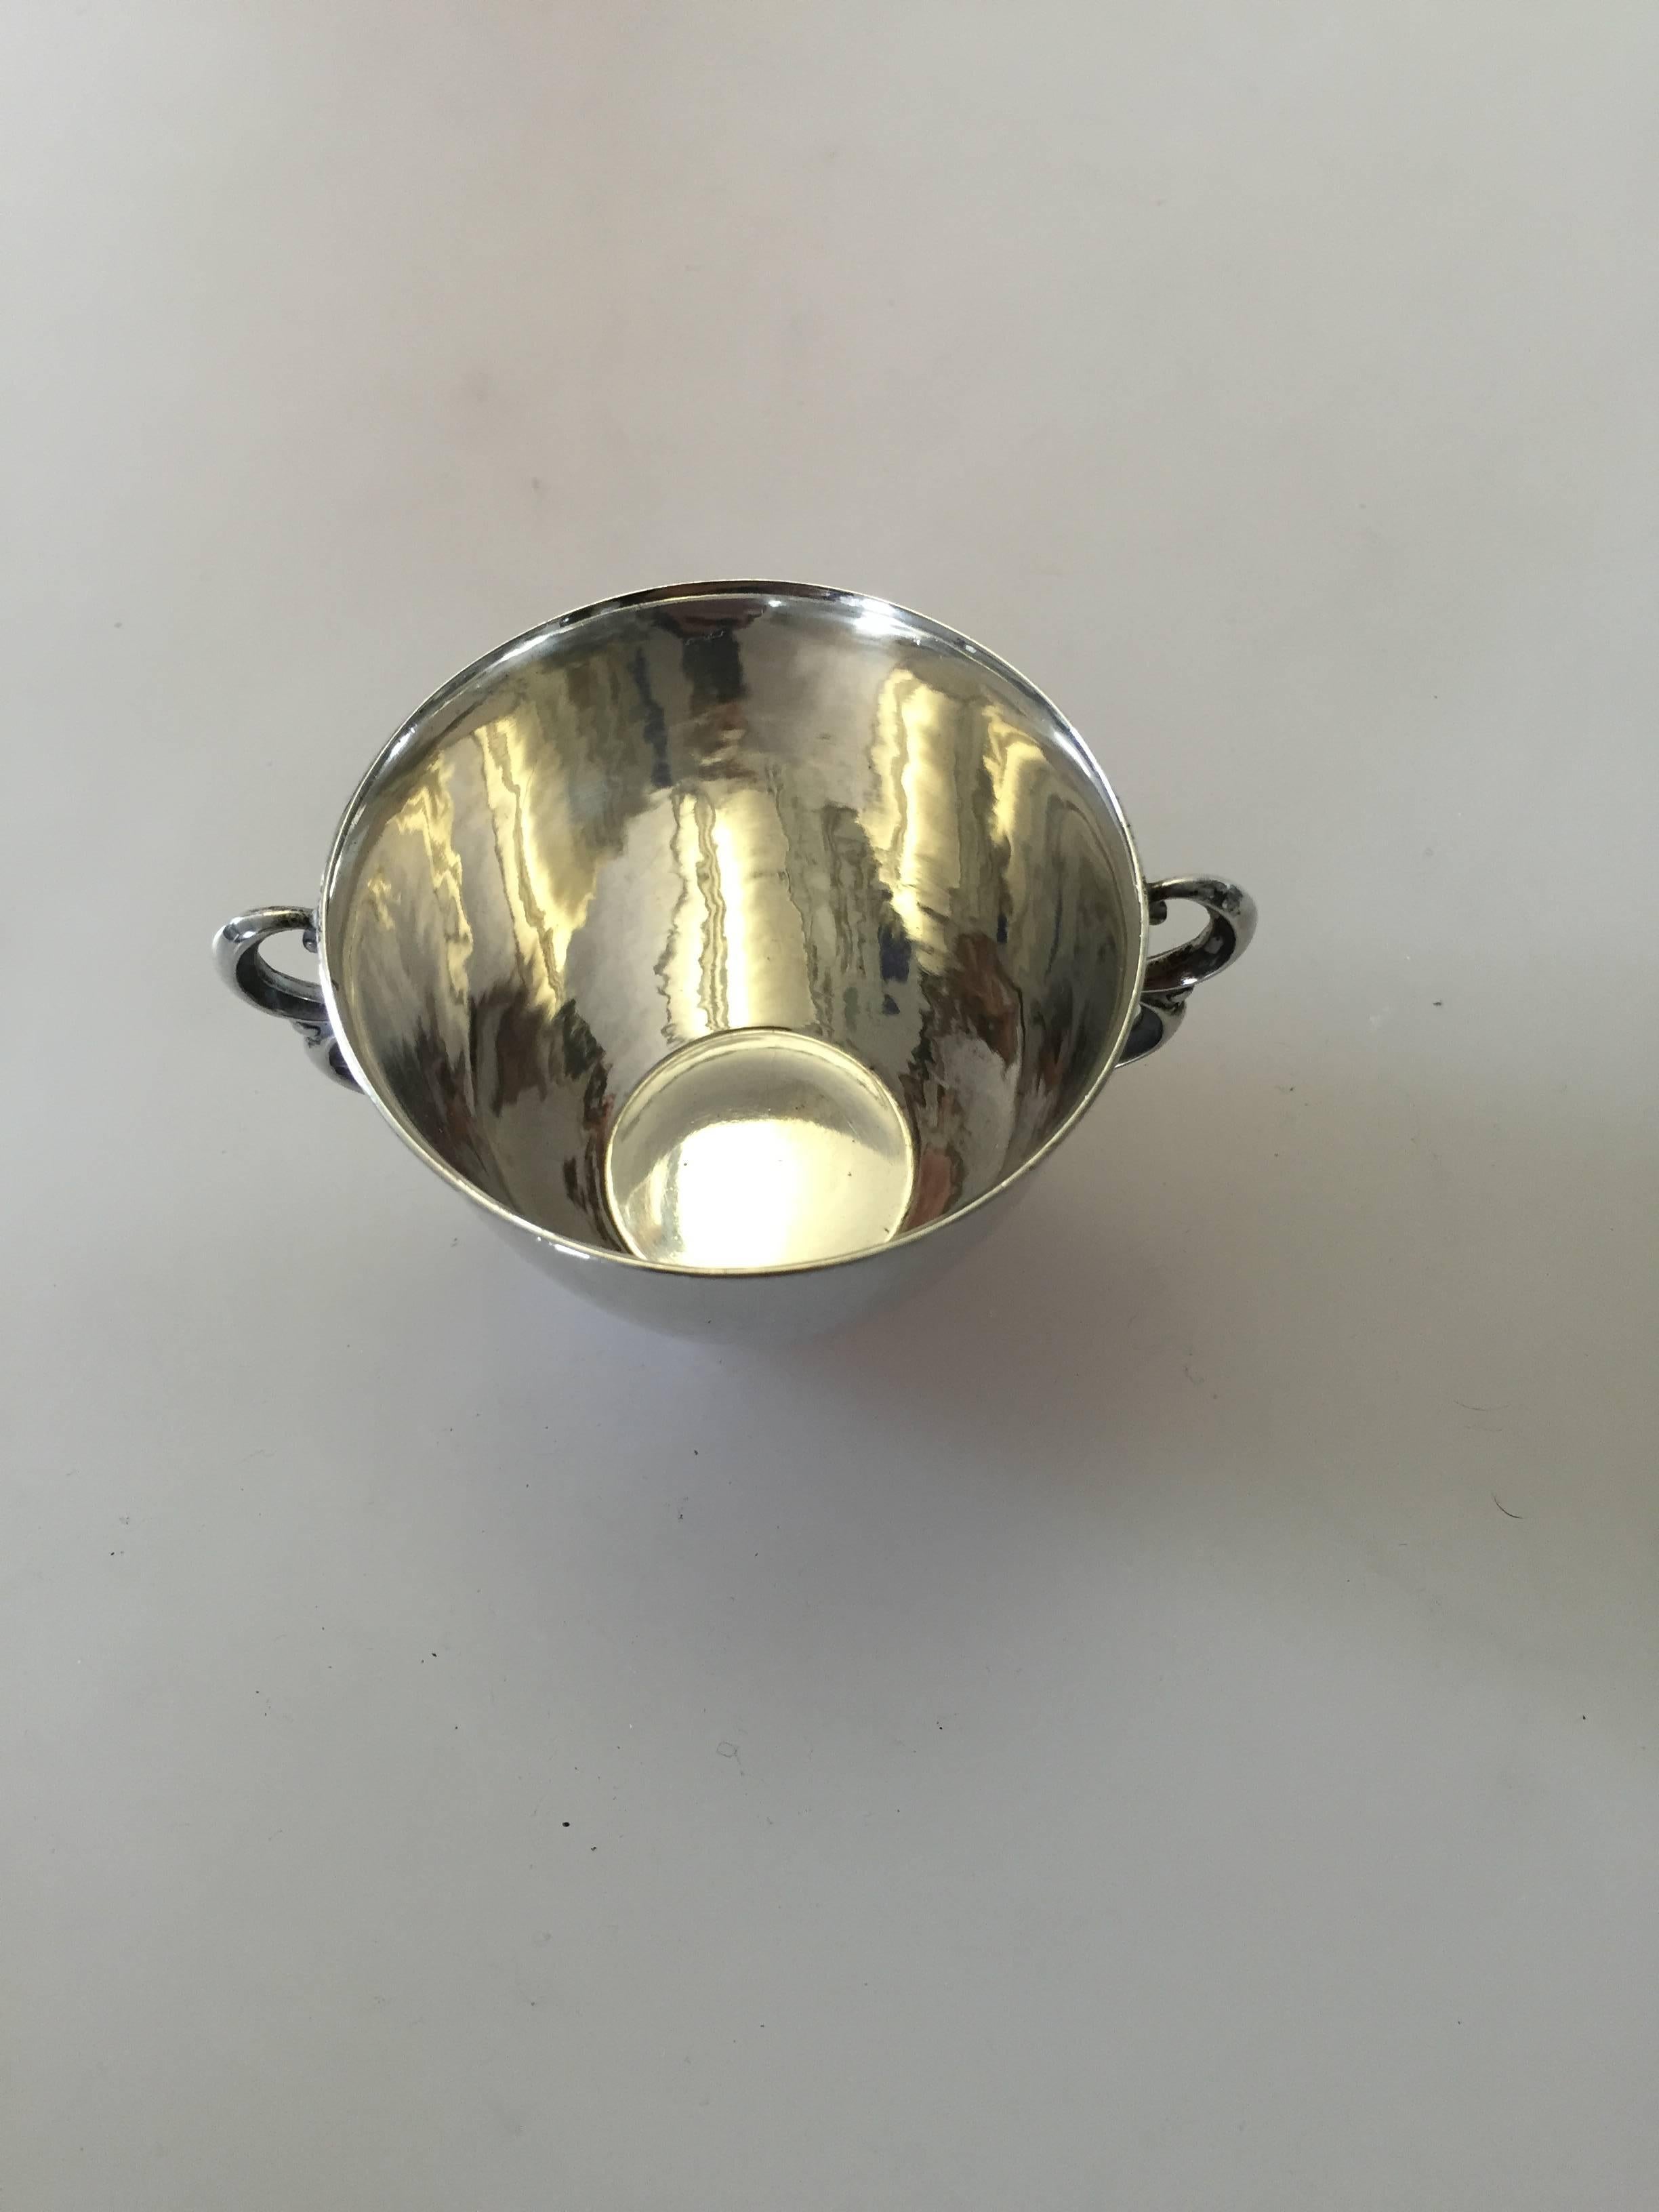 Georg Jensen sterling silver cup with handles #373A. The cup is designed by Georg Jensen. This item has marks from 1945-1951 and is in a good condition. 

Georg Jensen (1866-1935) opened his small silver atelier in Copenhagen, Denmark in 1904. By